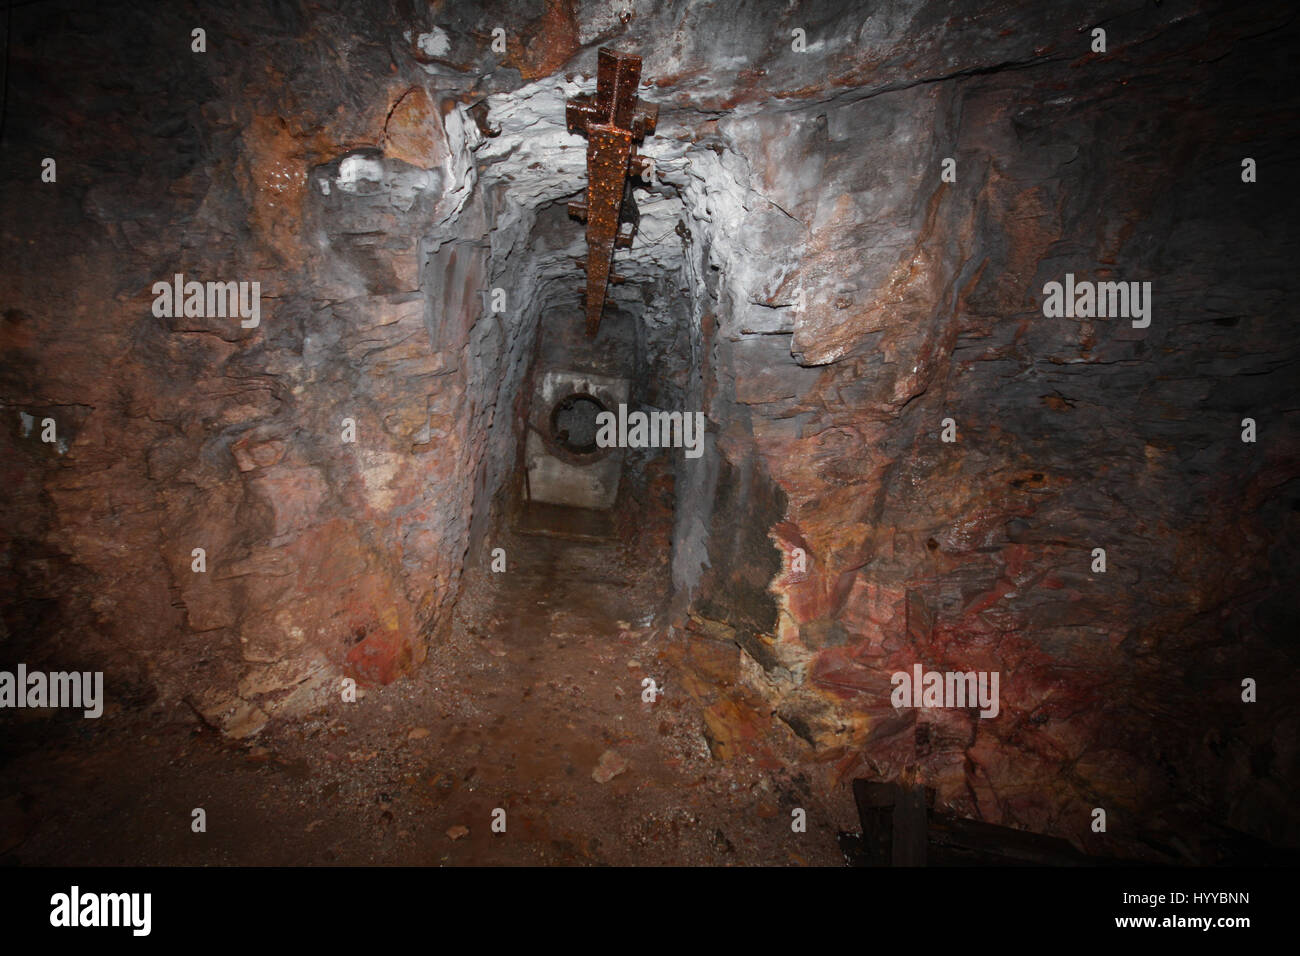 CALLINGTON, CORNWALL, UK: An adit. EERIE images reveal the Cornish mining tunnel that was once used to test explosives and research the potential impact of nuclear tests during the Cold War under the code name Operation Orpheus. The haunting pictures show inside the 2,180-foot tunnel where rusting sleepers and collapsing structures remain. Other shots, look down into an adit (entrance) and show the unsuspecting exterior of the mine where a metal gate has been closed across. The spectacular images were taken at the Excelsior Tunnel, Kit Hill, Callington, Cornwall by editor, Nat W (46) from Lond Stock Photo